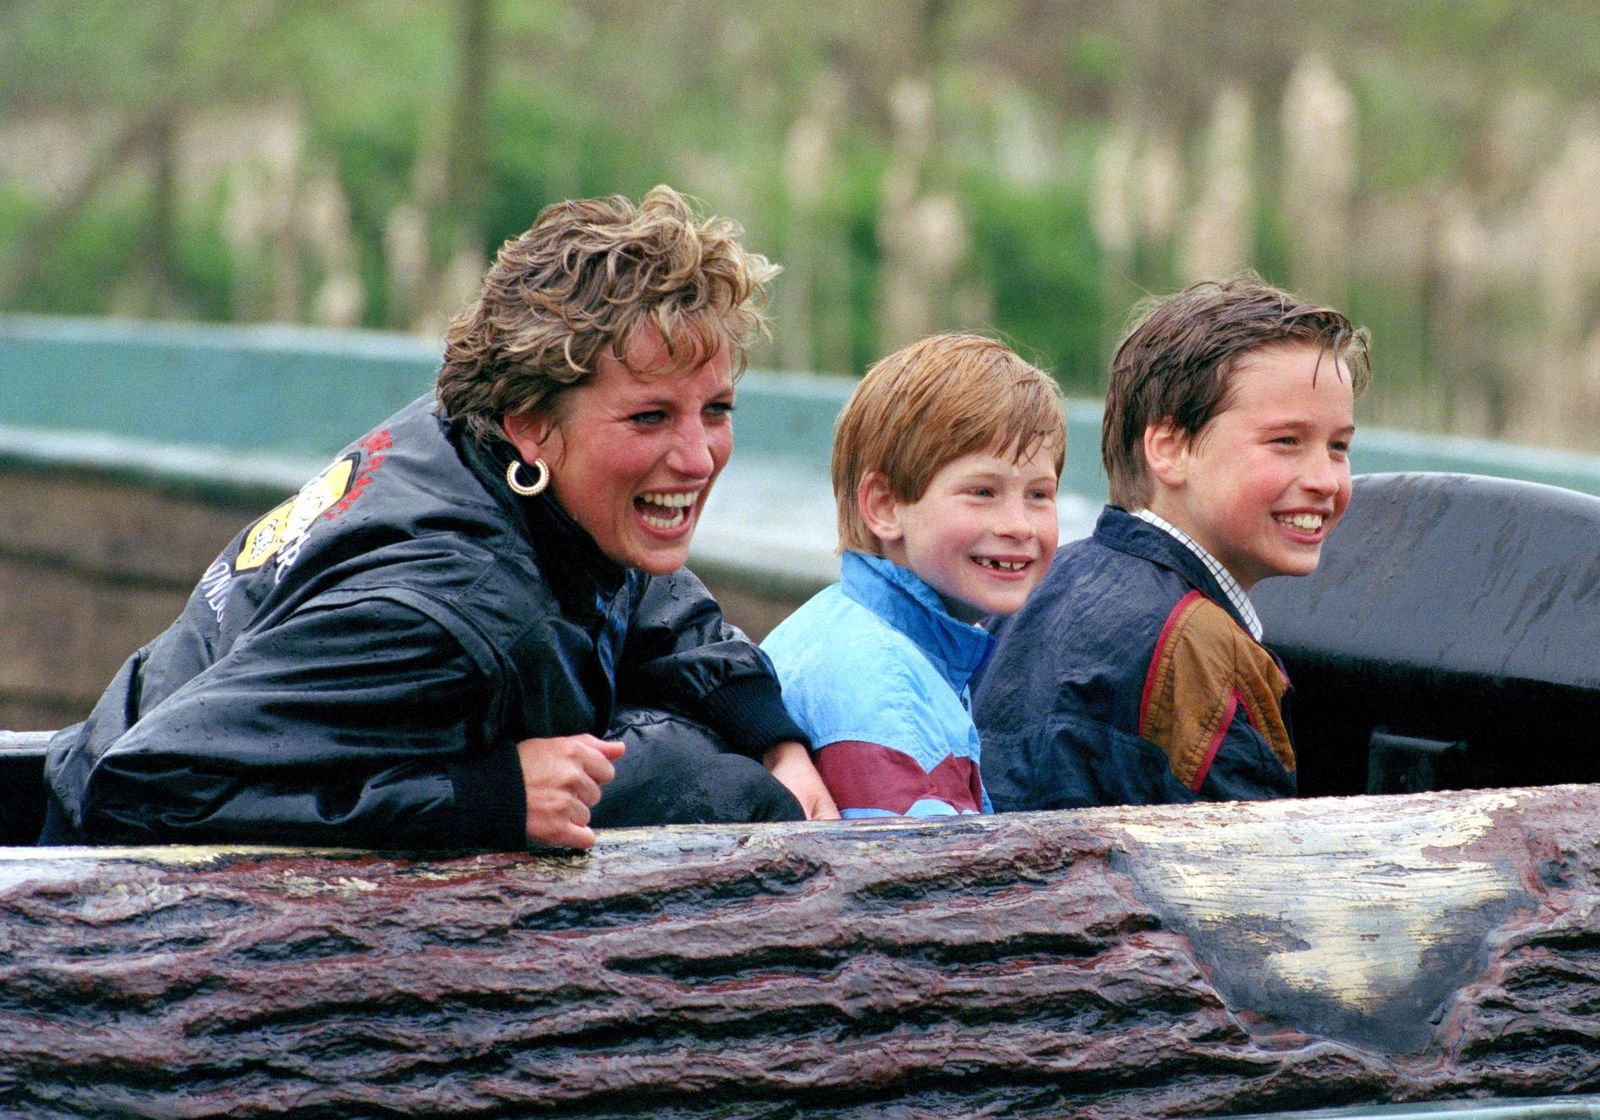 Princess Diana, Prince William, and Prince Harry at The "Thorpe Park" Amusement Park on April 13, 1993 | Photo: Getty Images